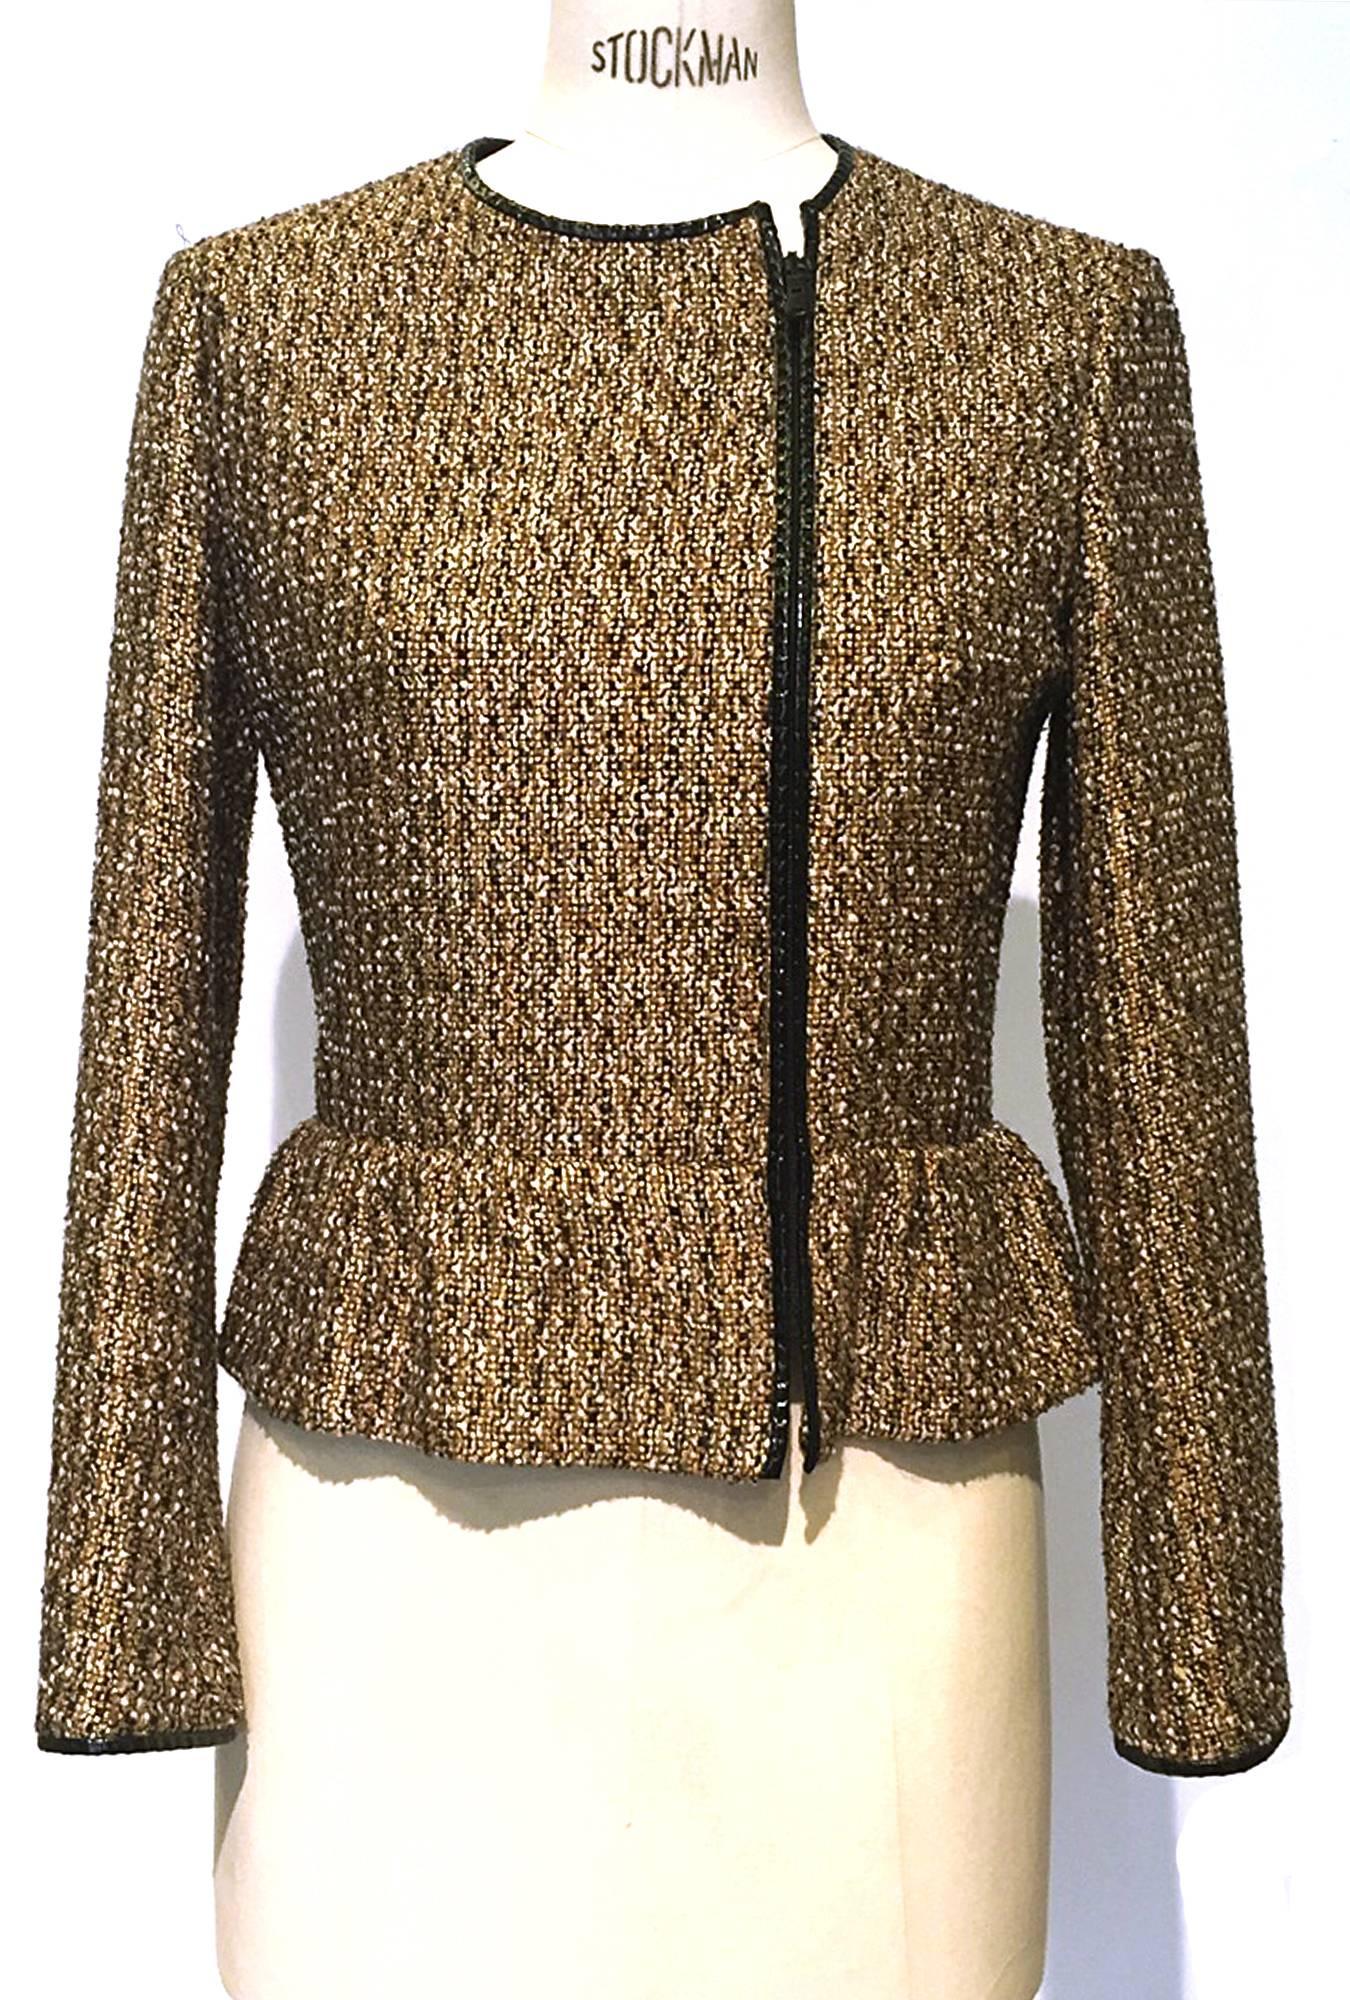 Blazer comes in a mix of mustard, black, ecru and gold woven boucle, front is asymmetrical with black patent leather trim around front neckline and sleeves, front side hidden zipper, slight pepline at waist and is fully lined in silk, a chic take on